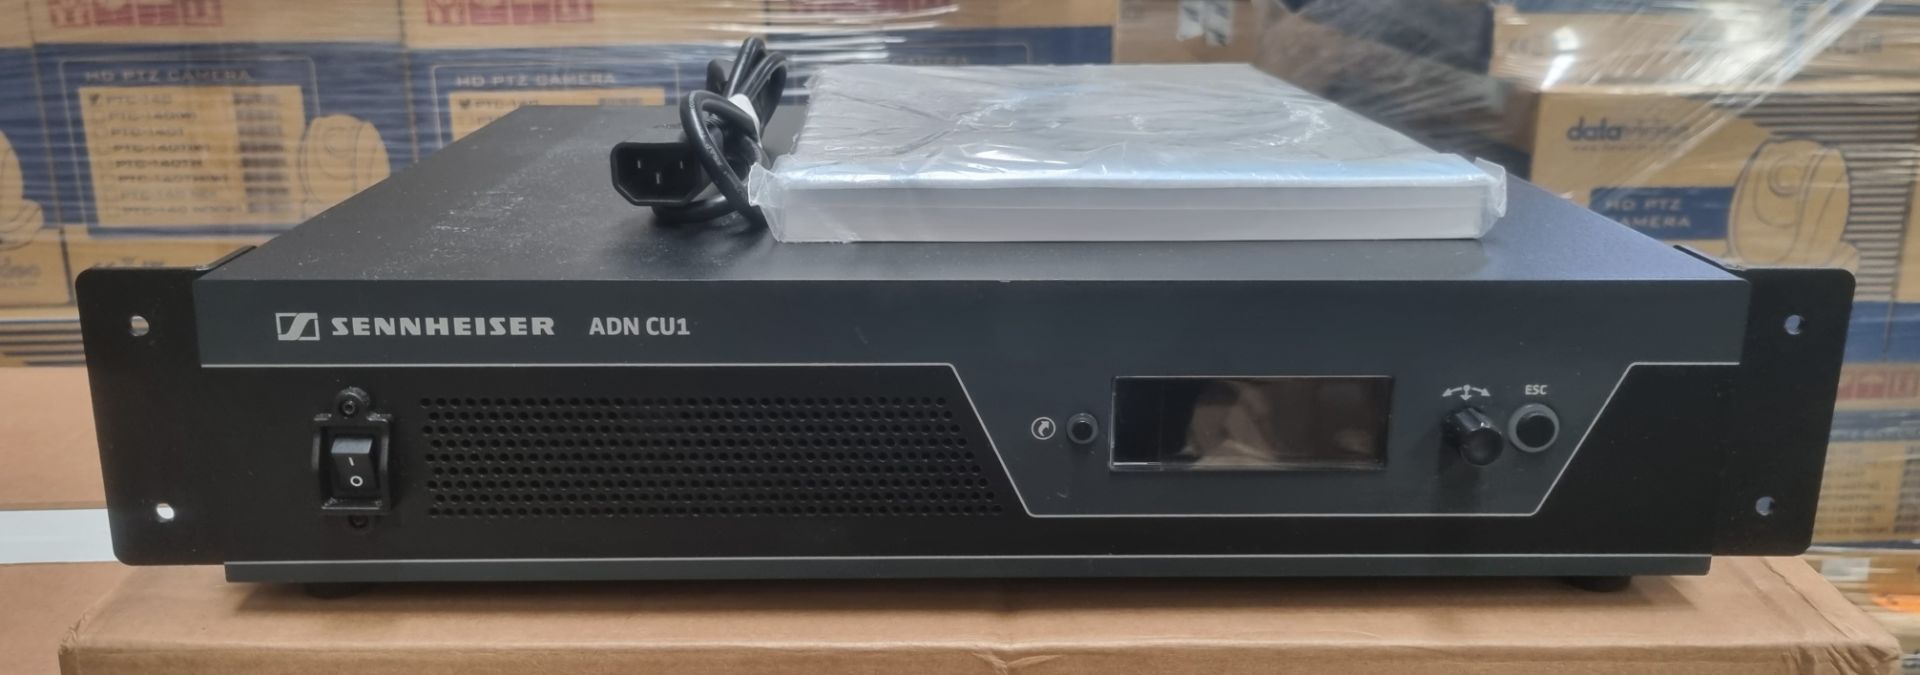 Sennheiser CU1-UK central control unit, STOCK IMAGE, tested and working unit only